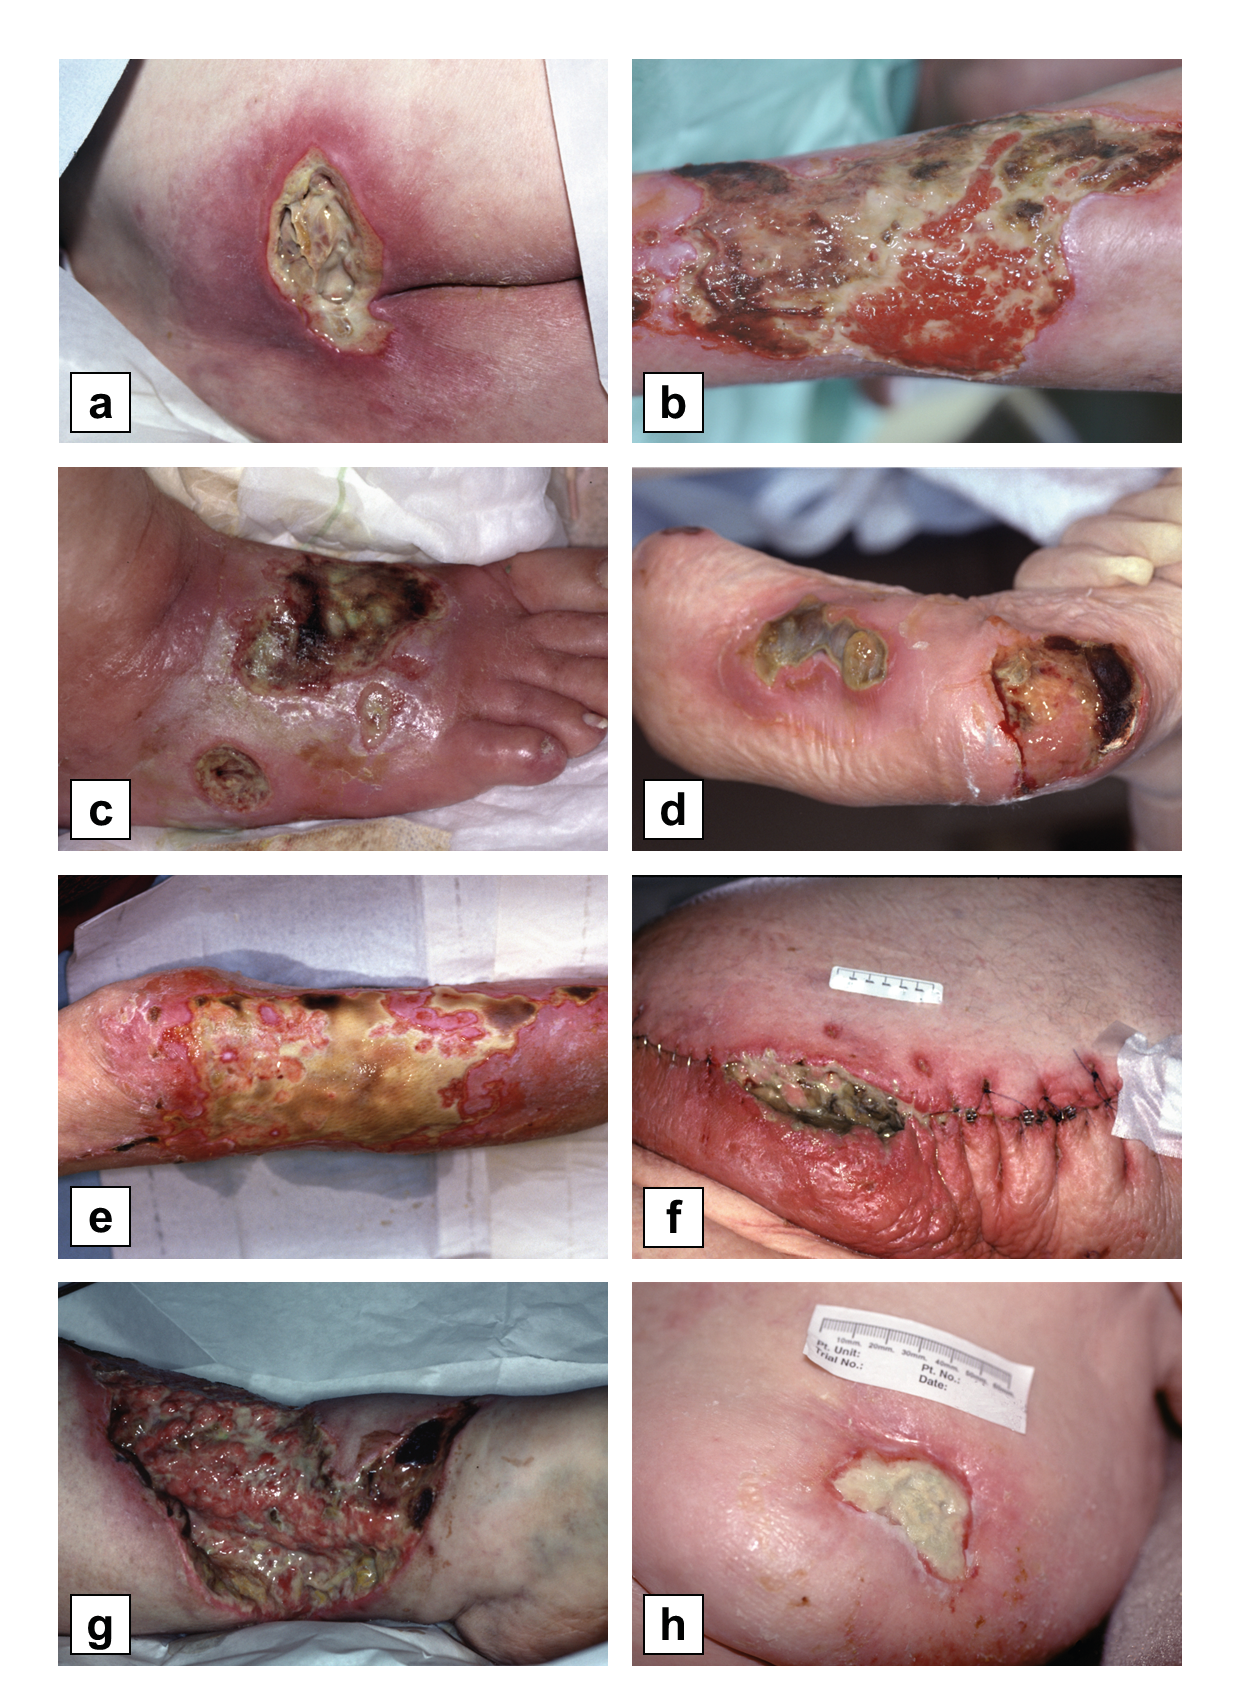 This figure shows eight photographs of chronic wound types that are amenable to maggot therapy. They include a pressure ulcer, a venous stasis ulcer, a diabetic foot ulcer, a burn, surgical wound dehiscence, an orthopaedic wound, and a malignancy.